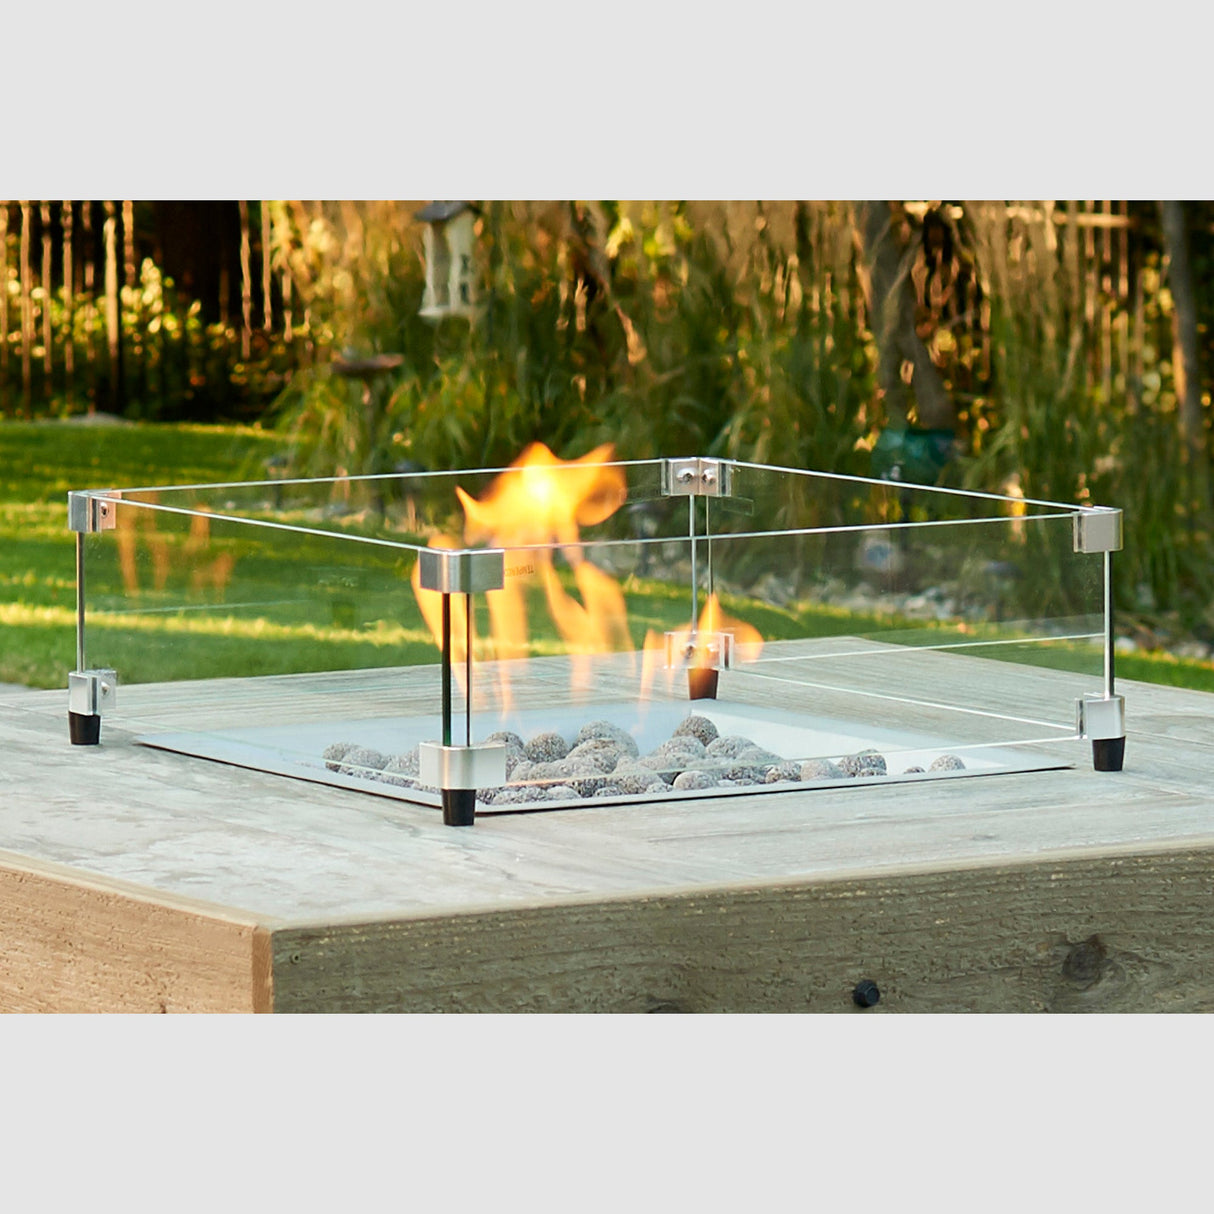 The Square Glass Wind Guard being used in a background setting to protect the flame coming from the burner